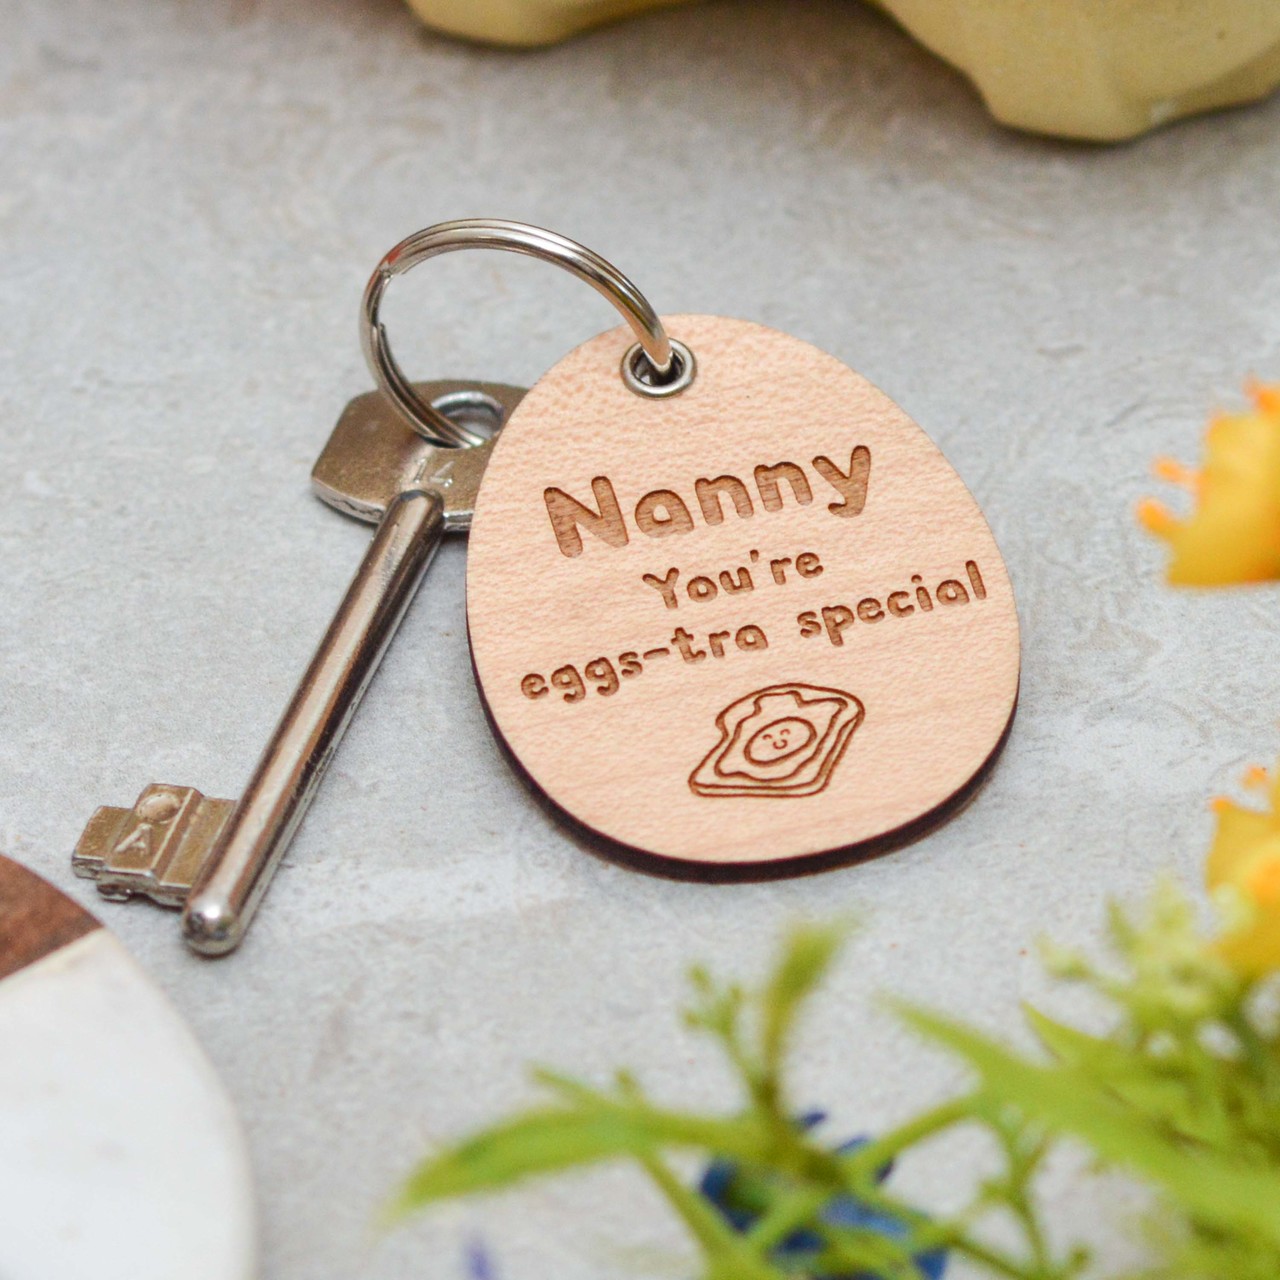 Personalised Eggs-tra Special Keyring